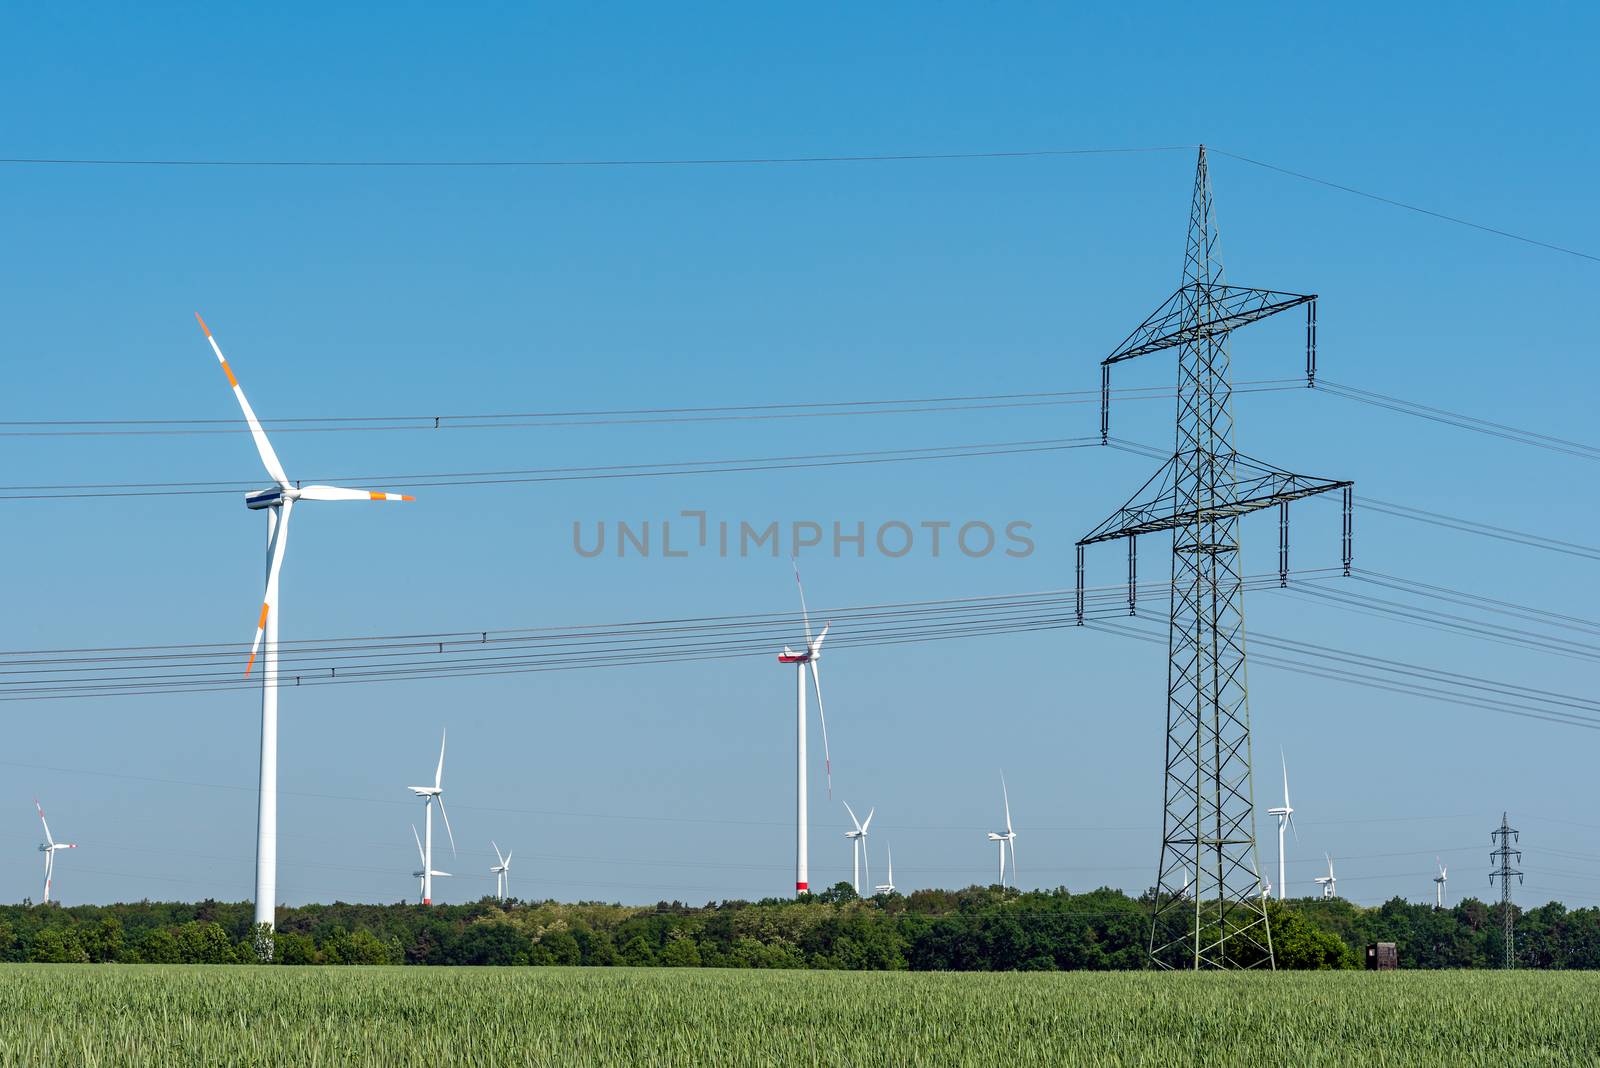 Overhead power line and wind turbines seen in rural Germany